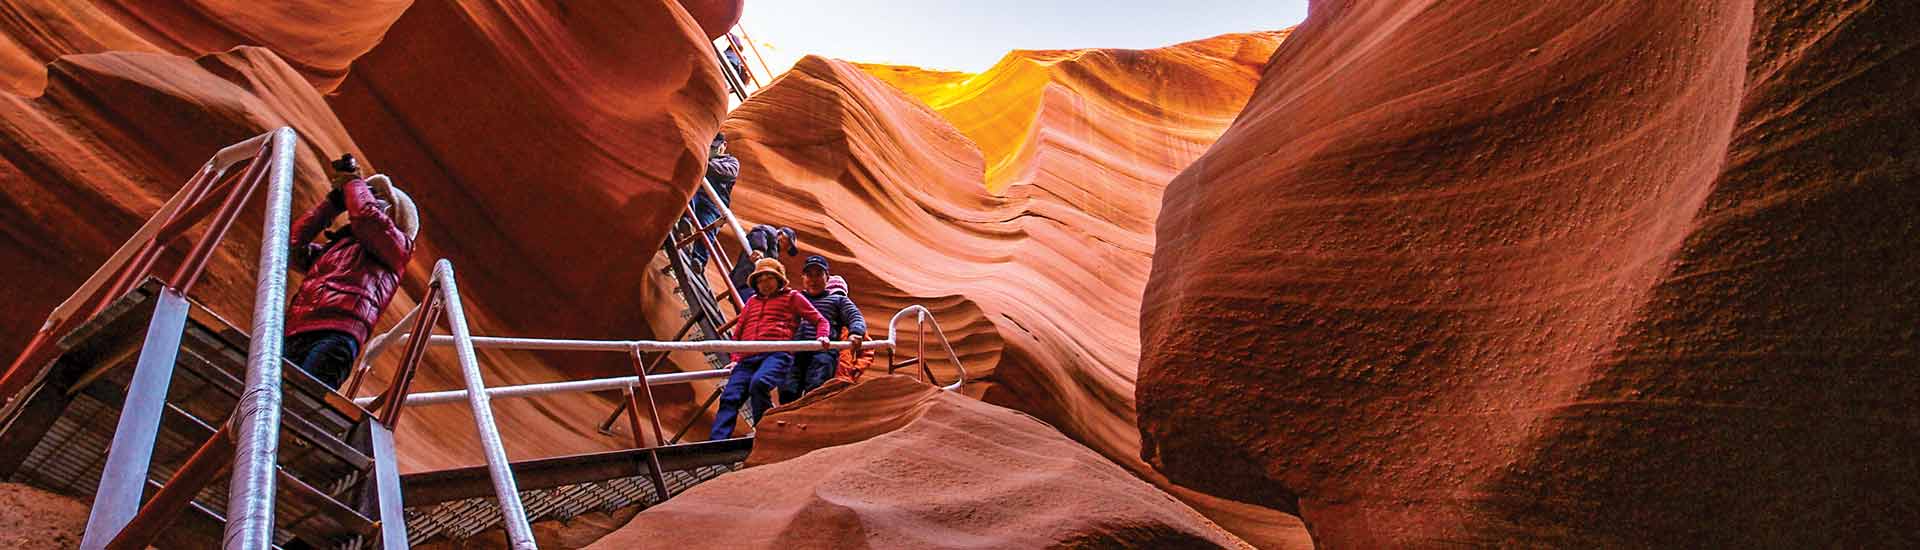 Visitors descending the staircase into Lower Antelope Canyon surrounded by swirling rock formations.